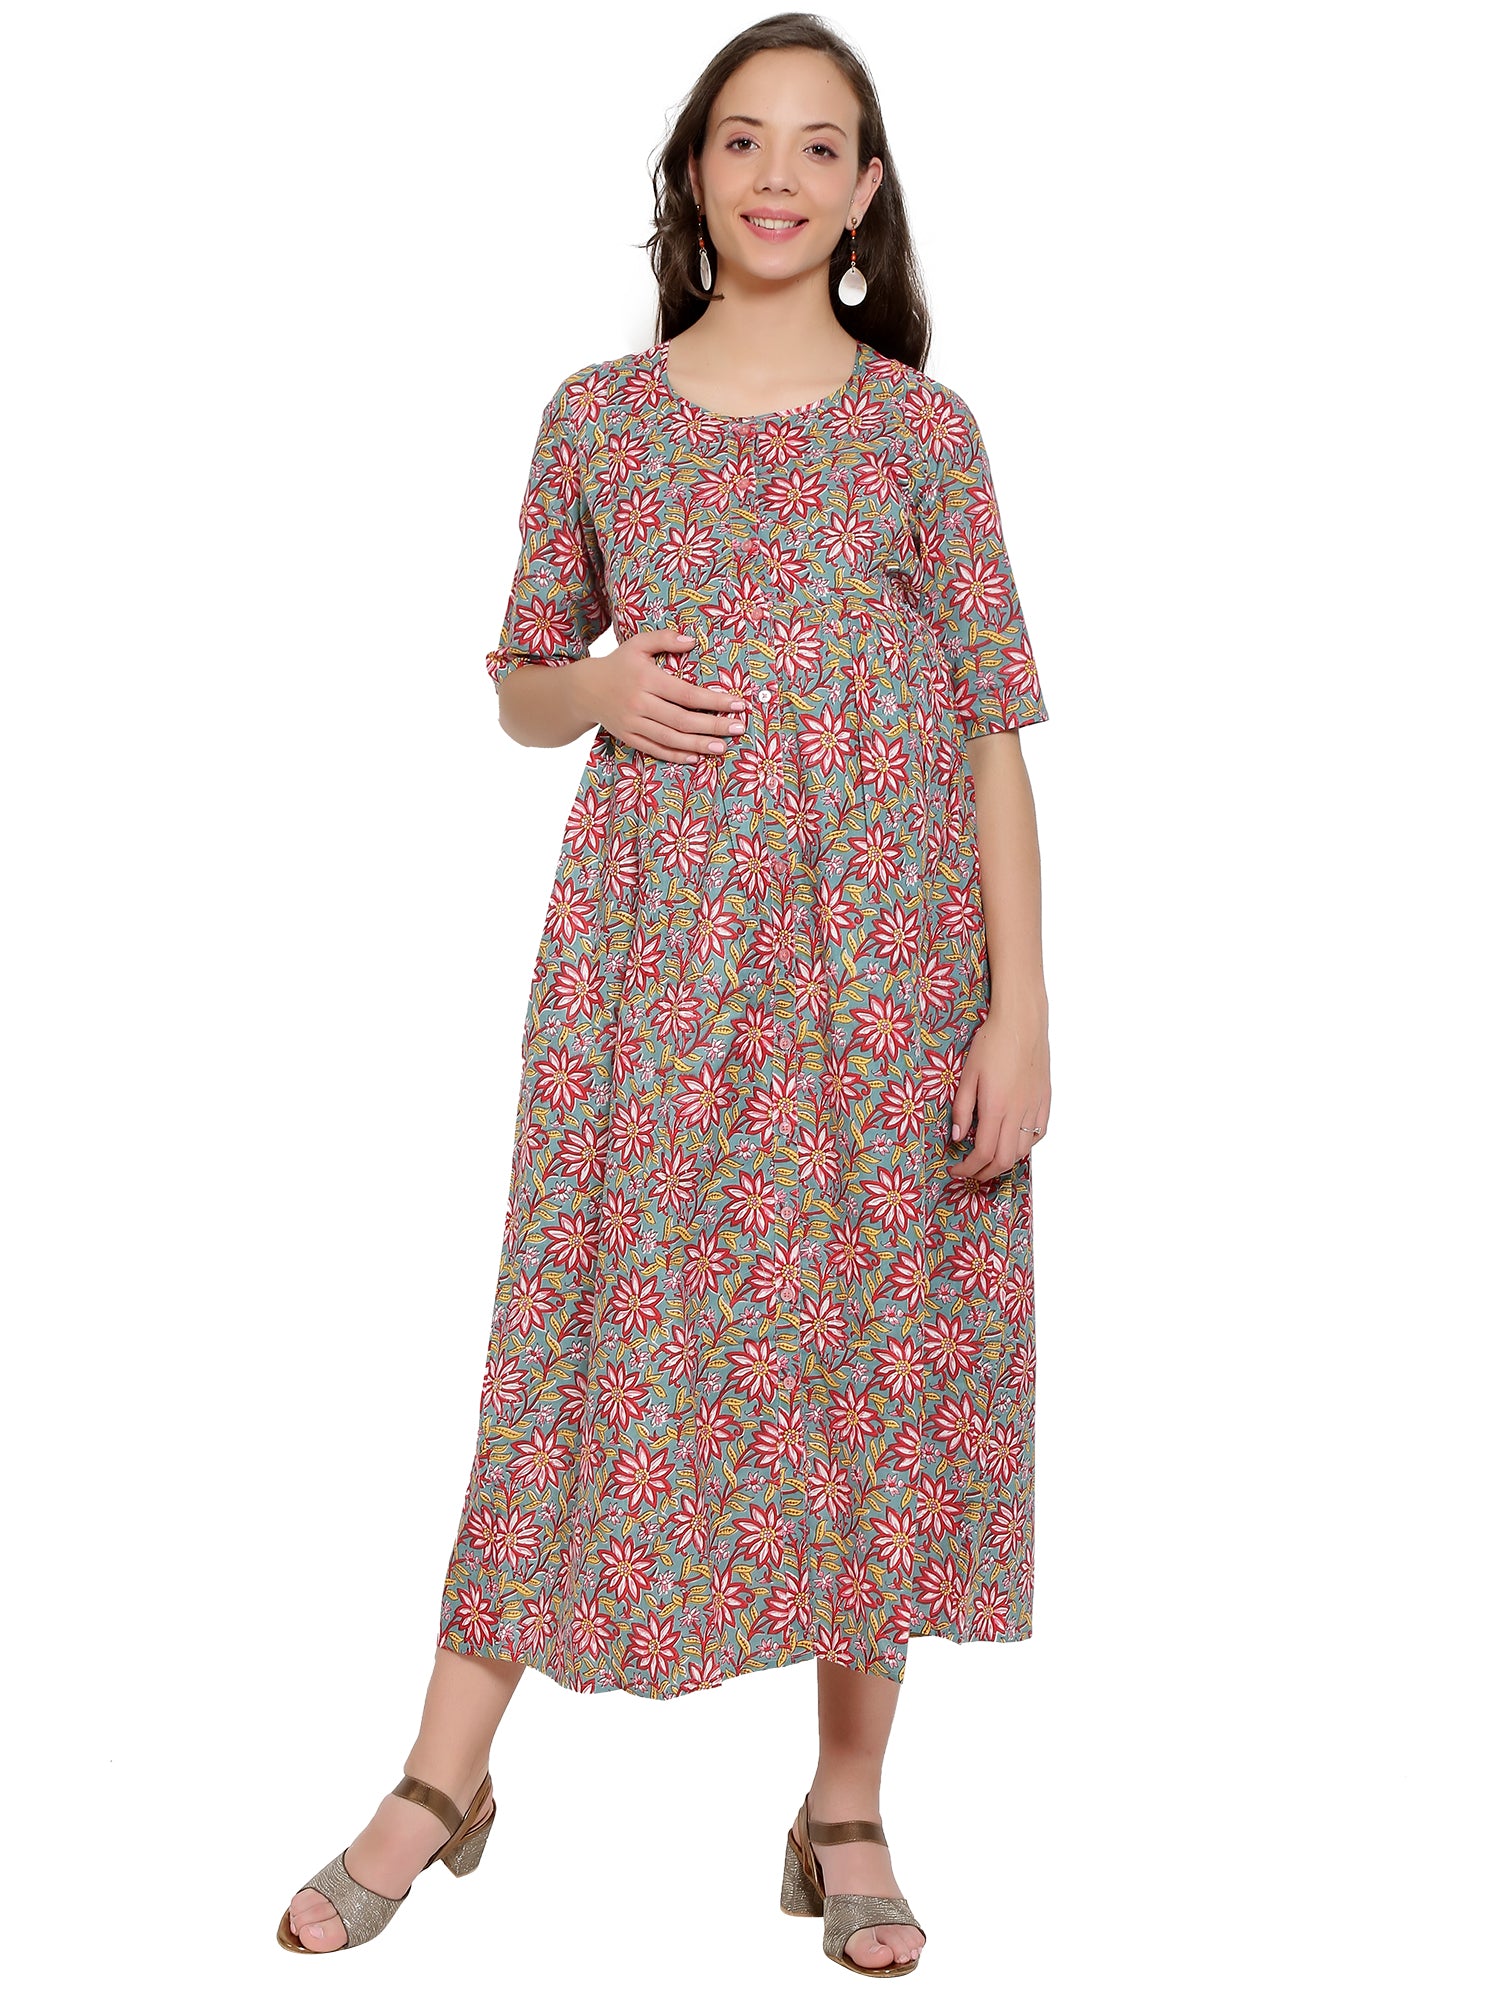 Brown Cotton Maternity and Feeding Full Length Dress